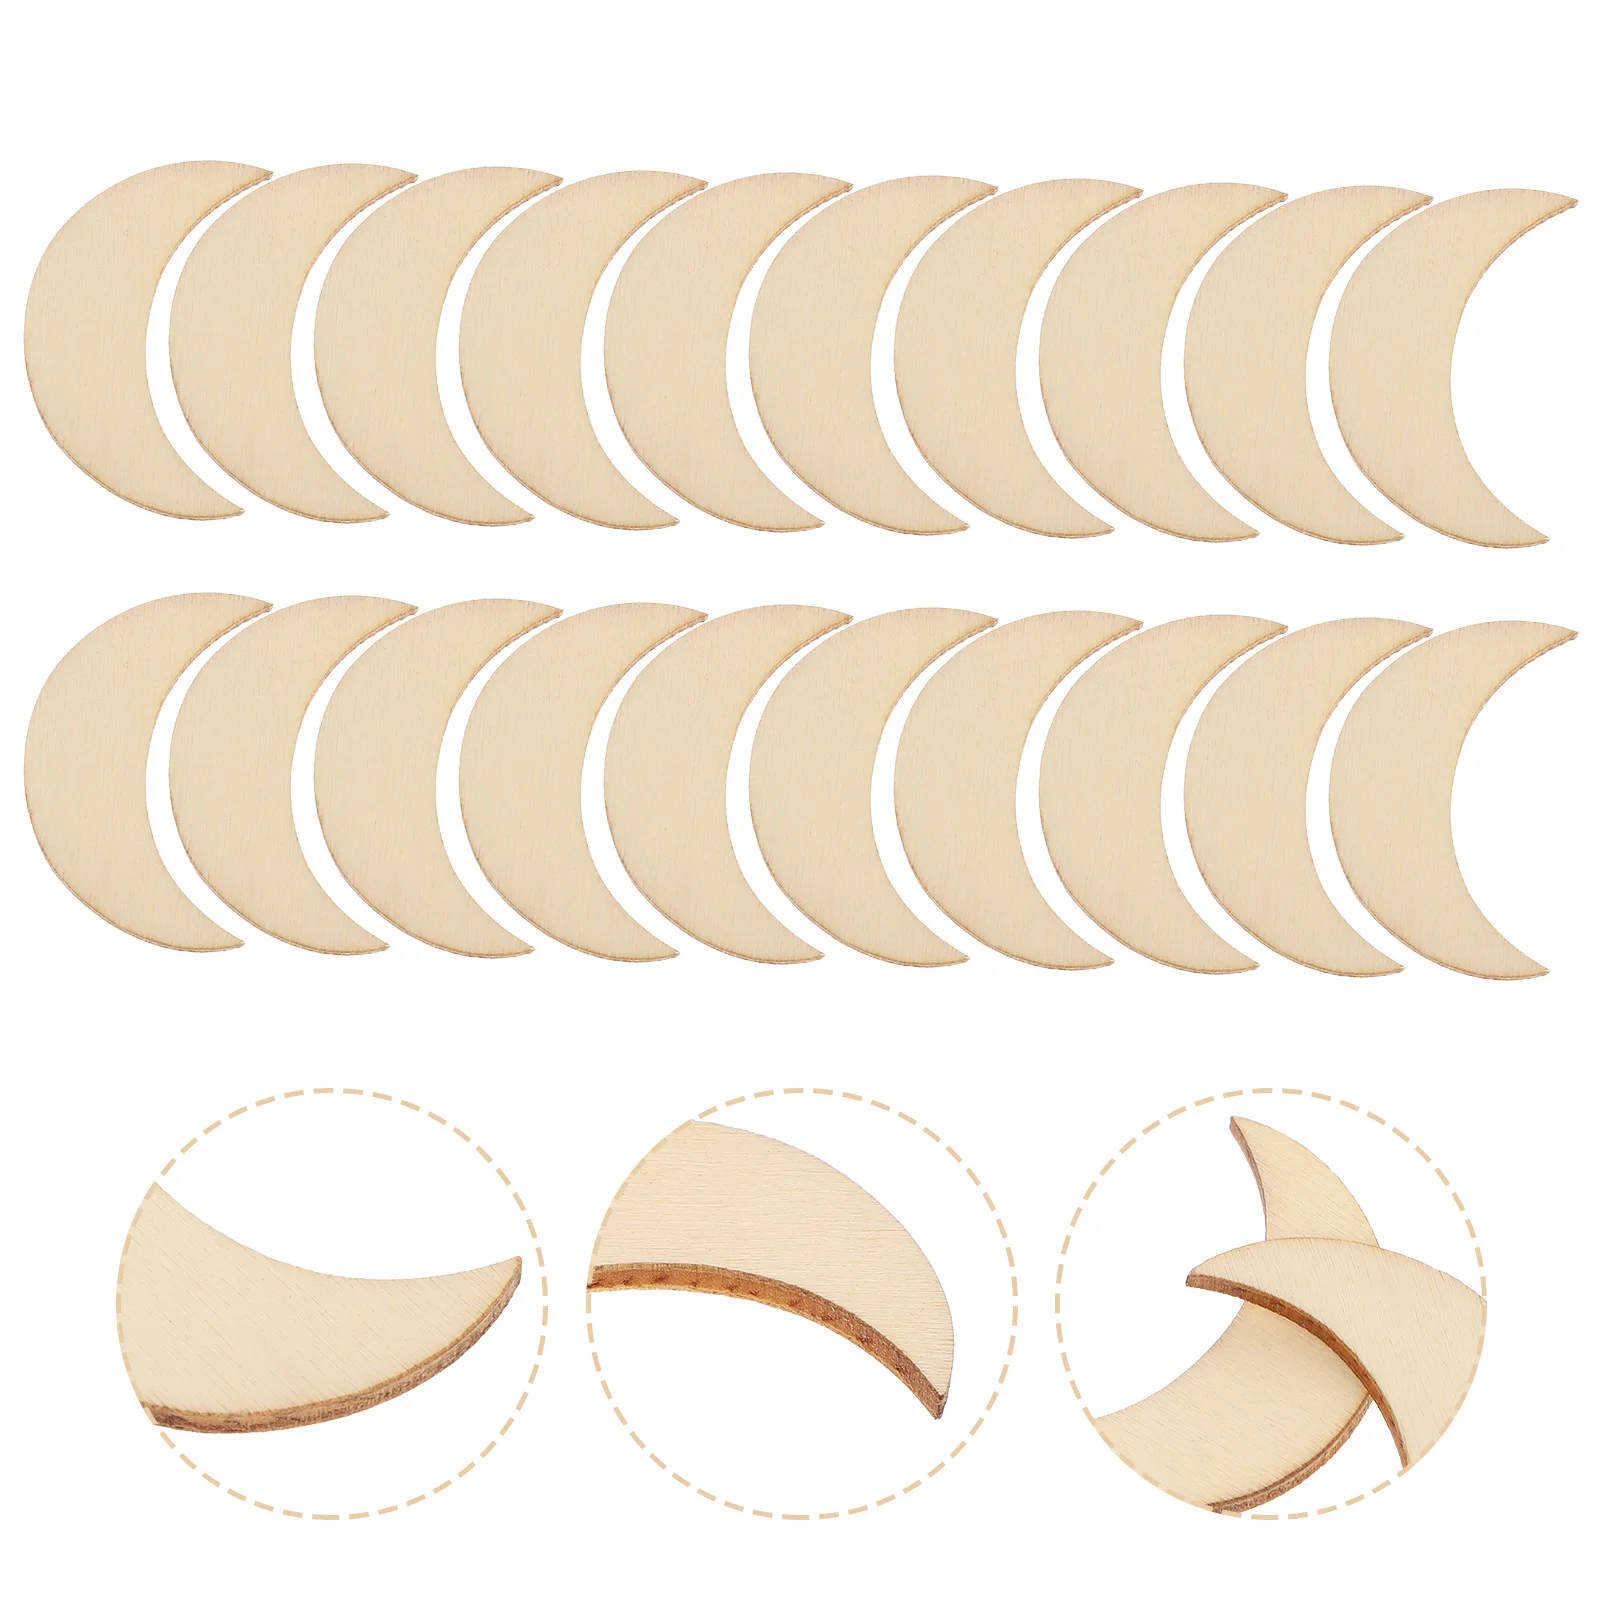 

Wooden Wood Moon Unfinished Cutouts Slices Blank Crafts Diy Shapes Pendant Discs Pieces Shape Ornaments Chips Natural Craft Tags